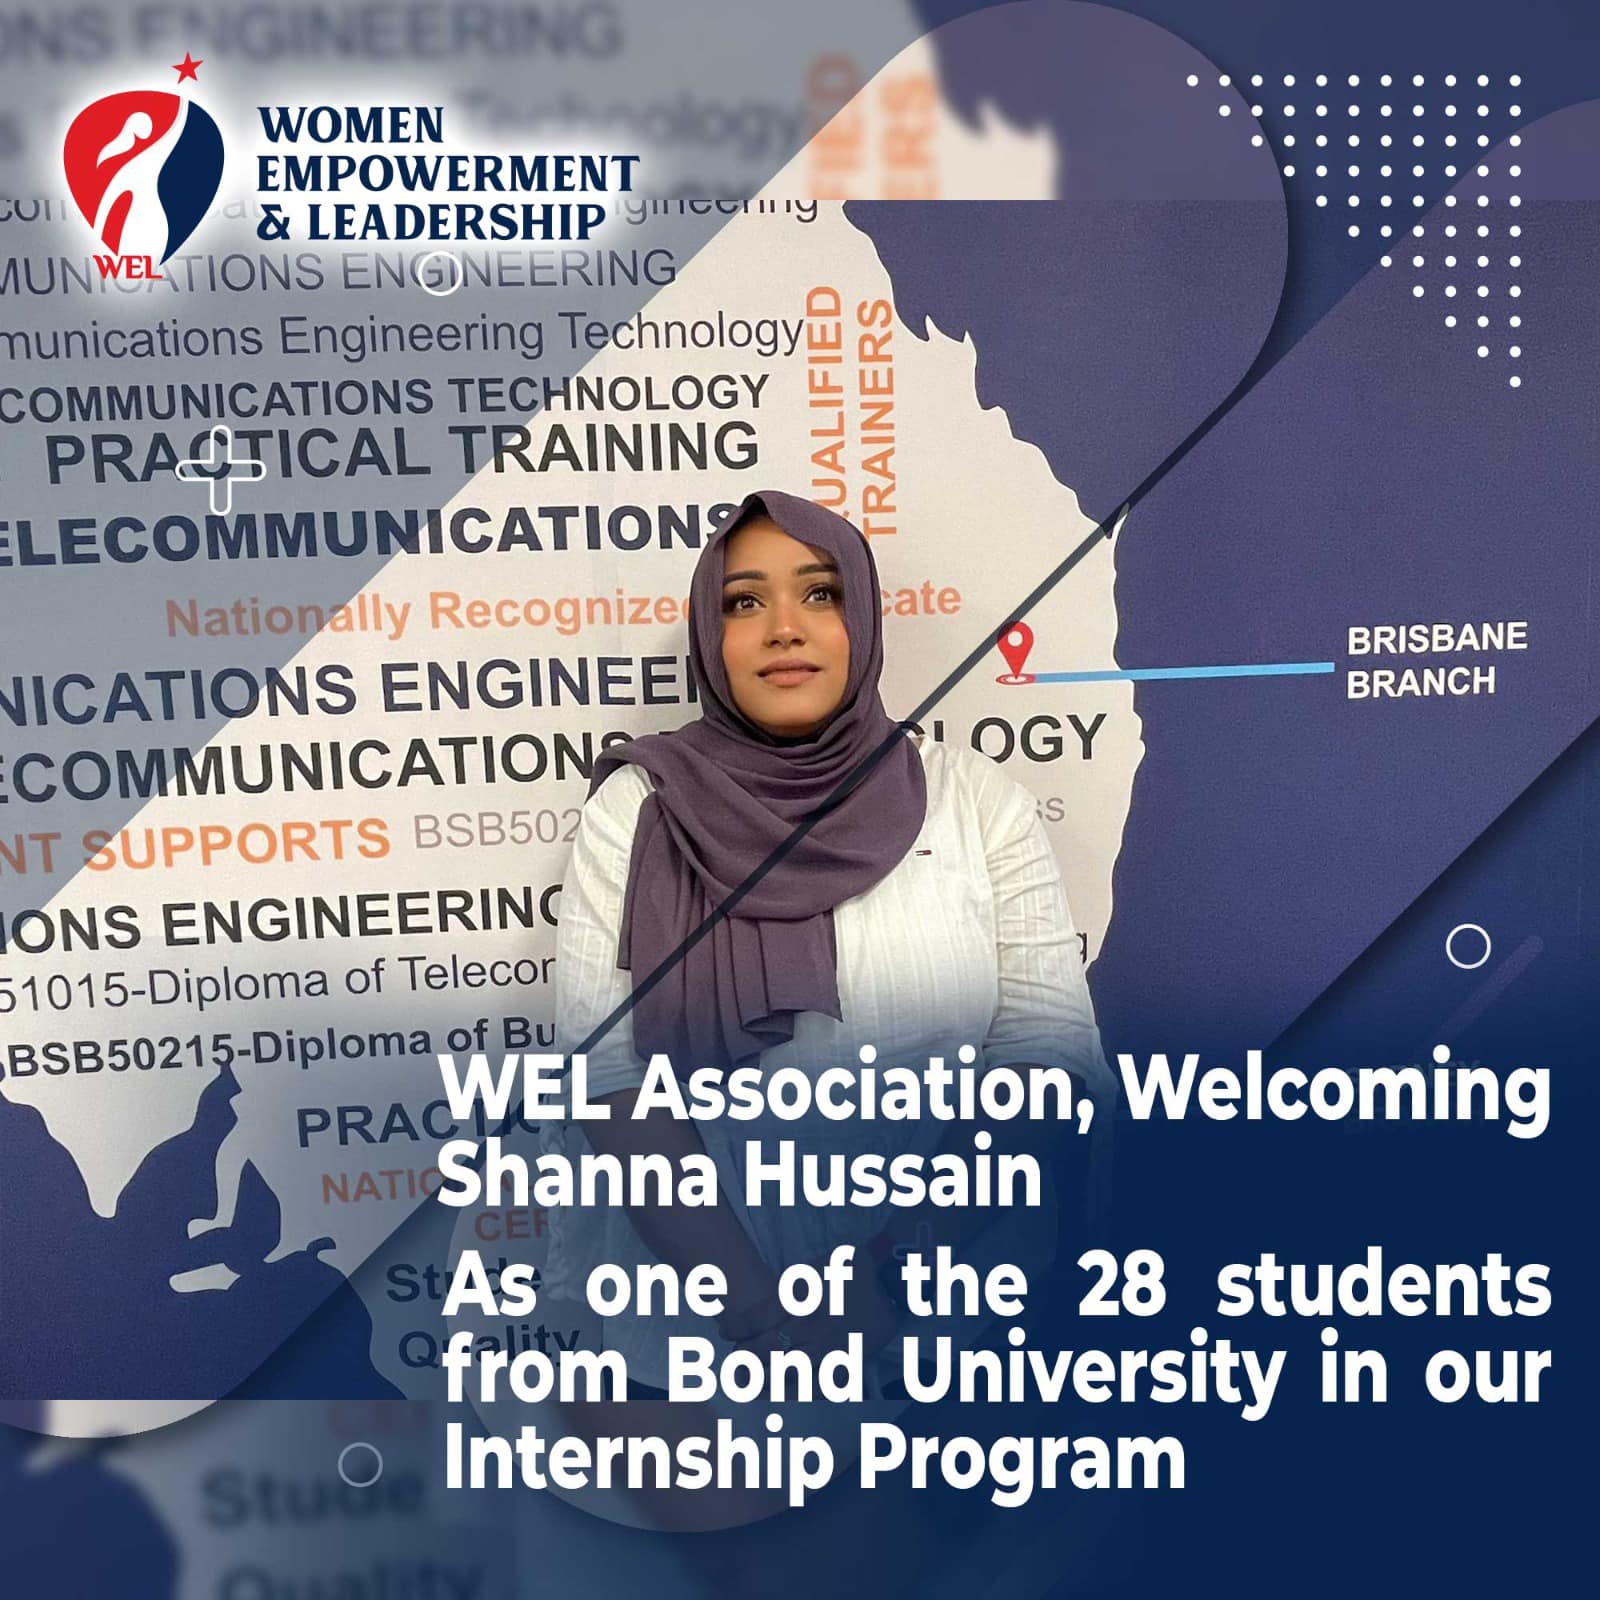 Women Empowerment and Leadership Proudly Welcoming Shanna Hussain